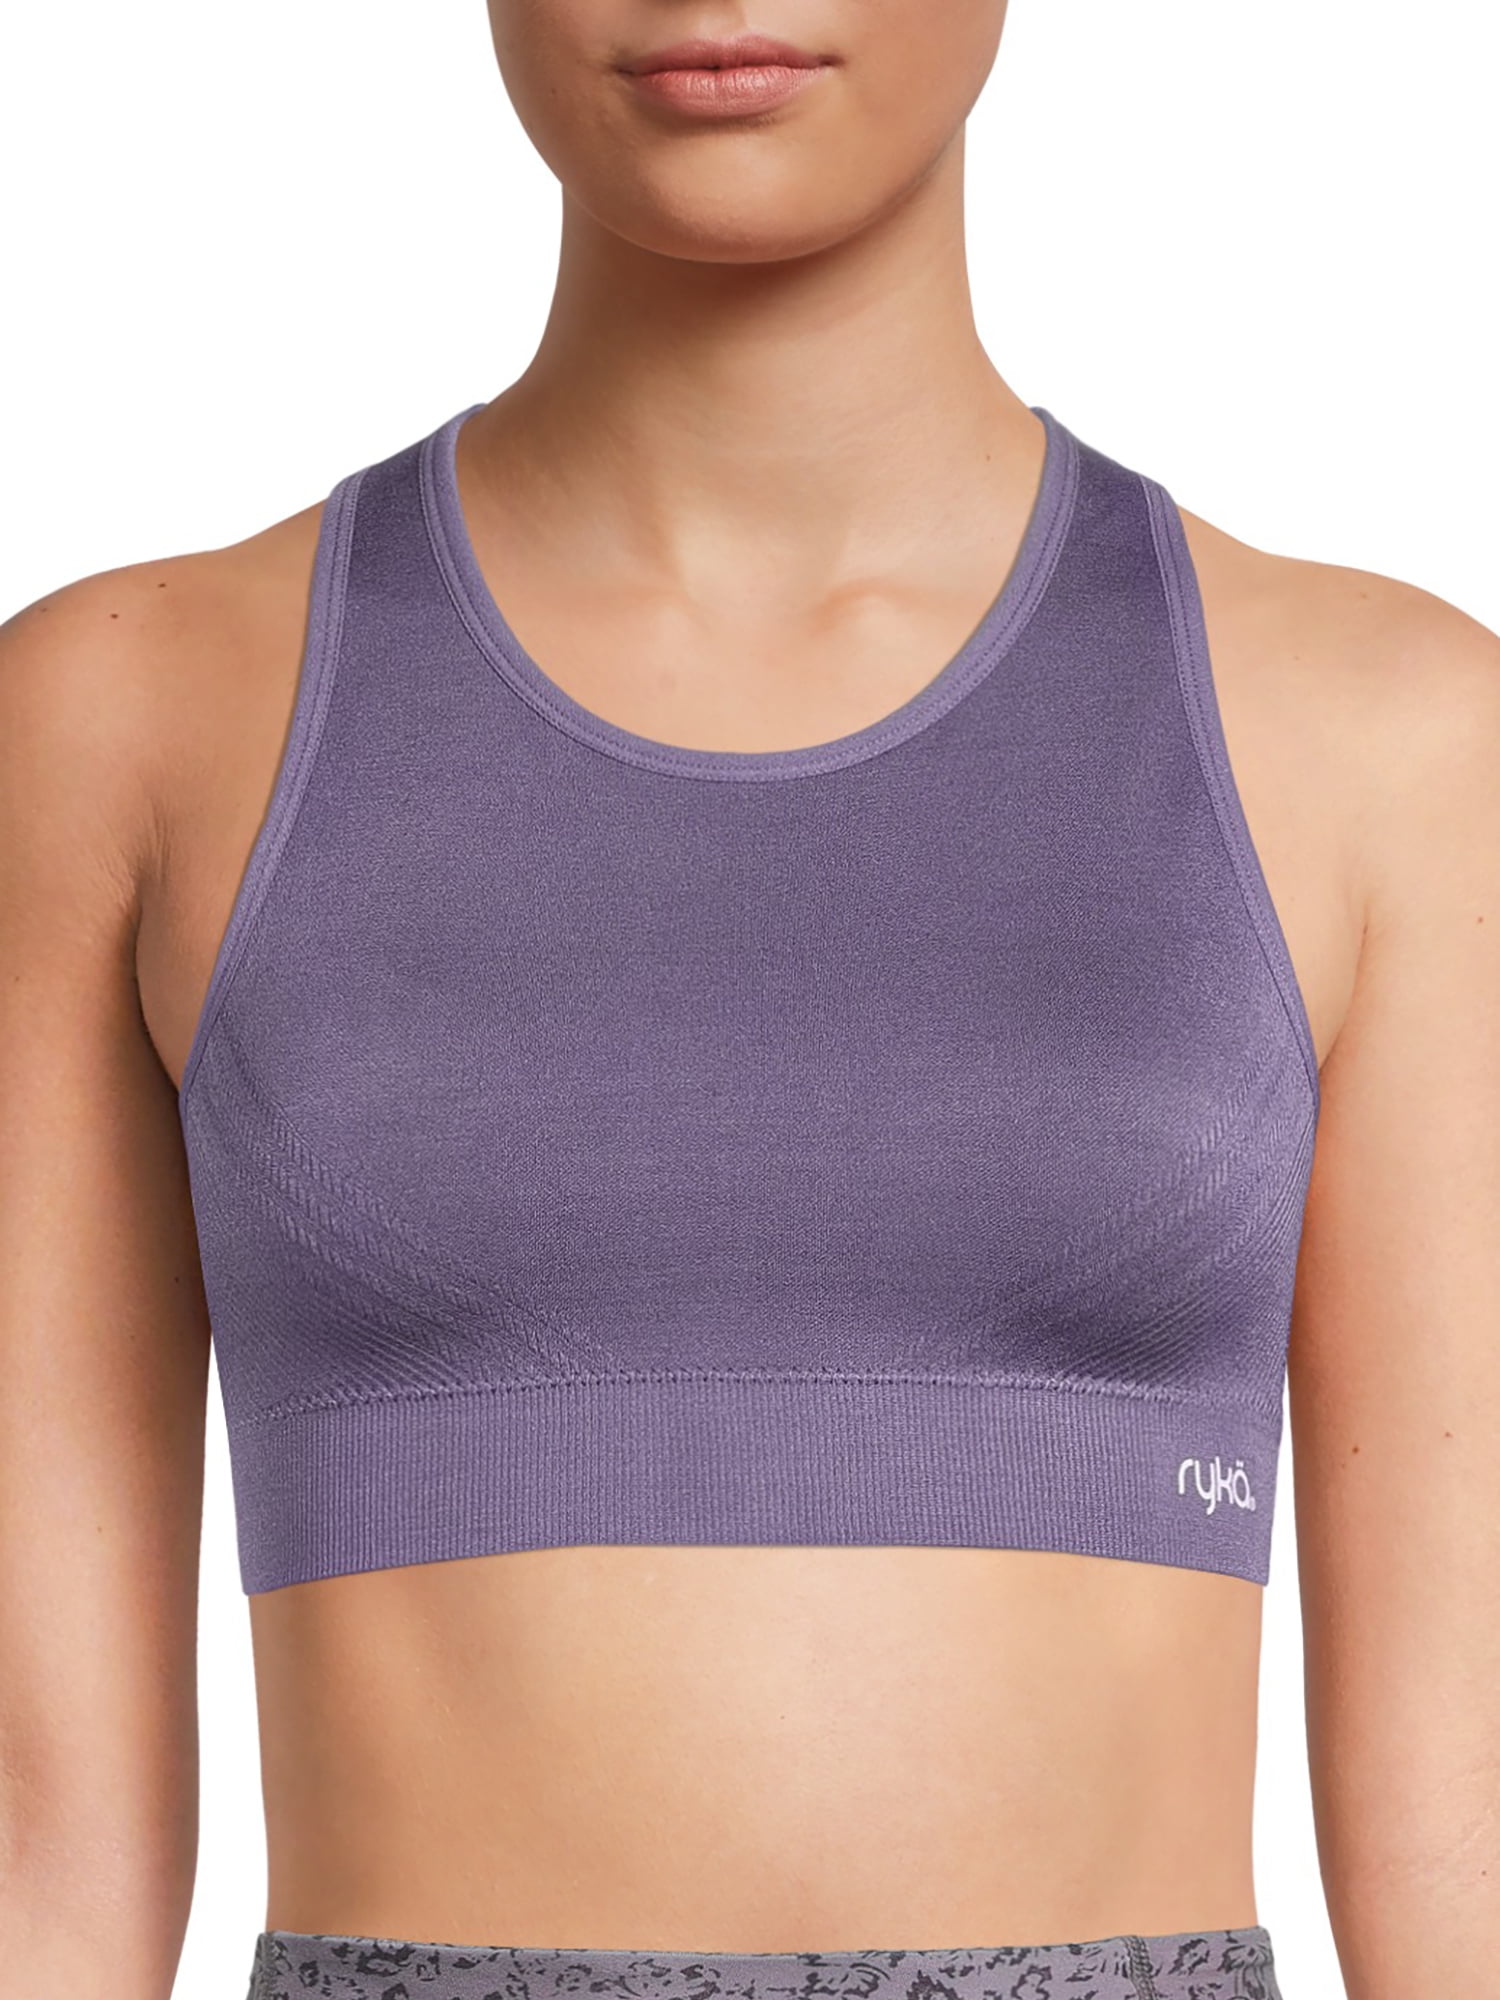 Ryka high neck athletic top/sports bra in faded rose/pink, ribbed